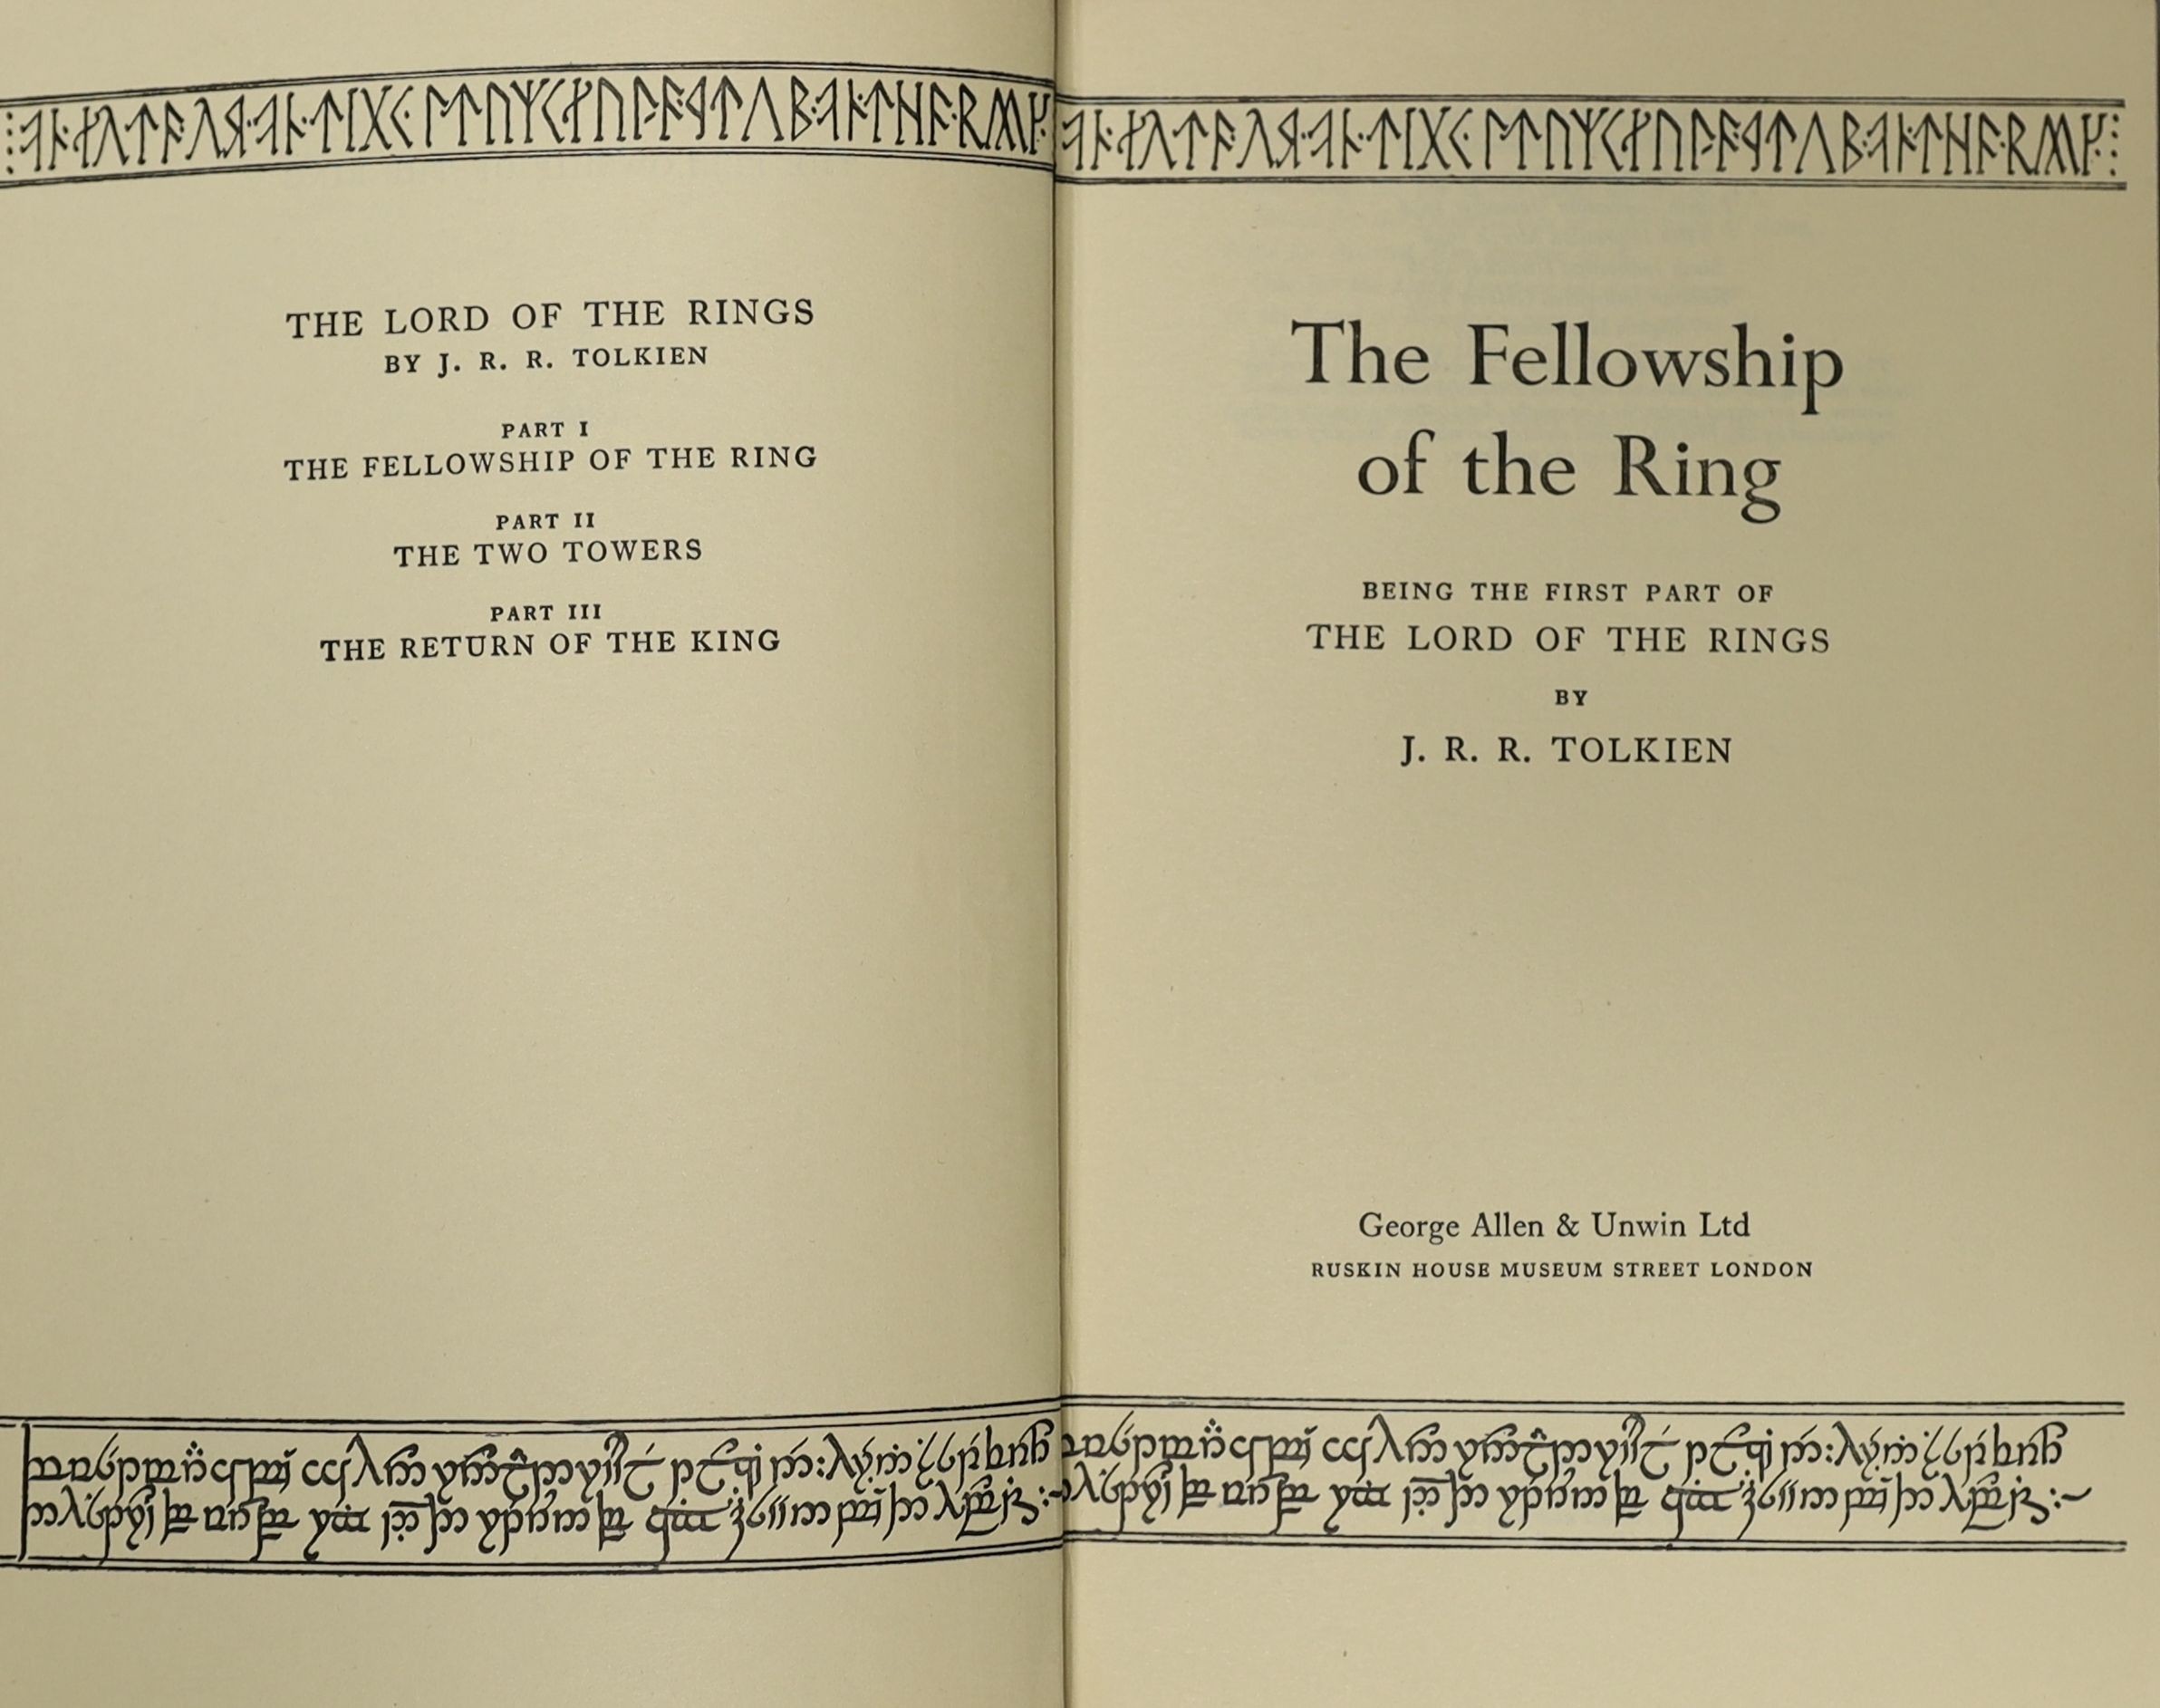 J.R.R. Tolkien, Lord of the Rings, three volumes